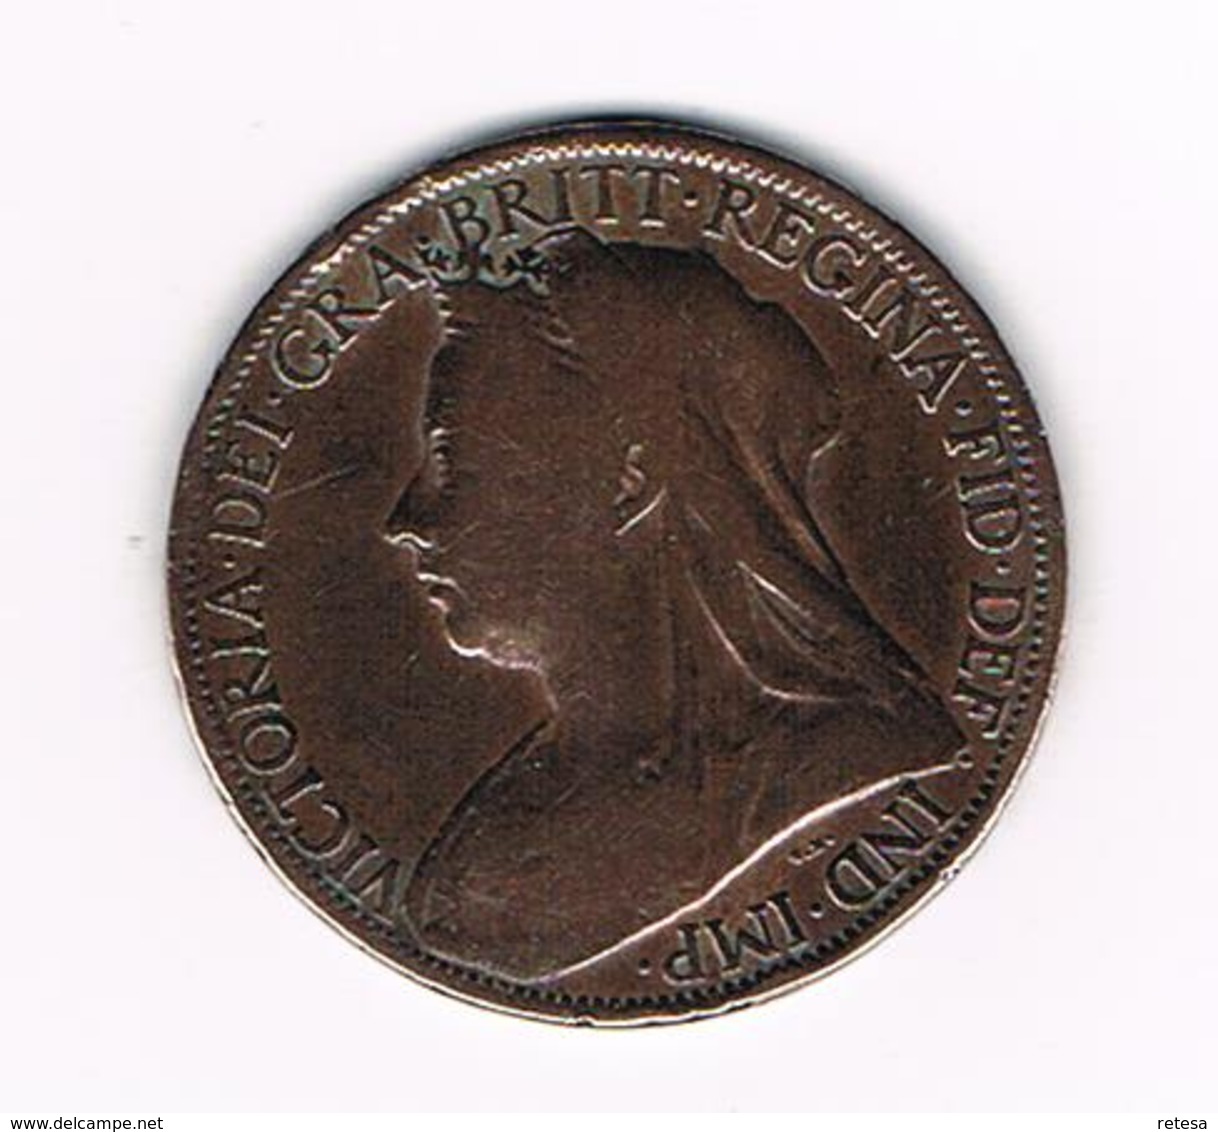 °°° GREAT BRITAIN  1 PENNY 1898  VICTORIA - D. 1 Penny